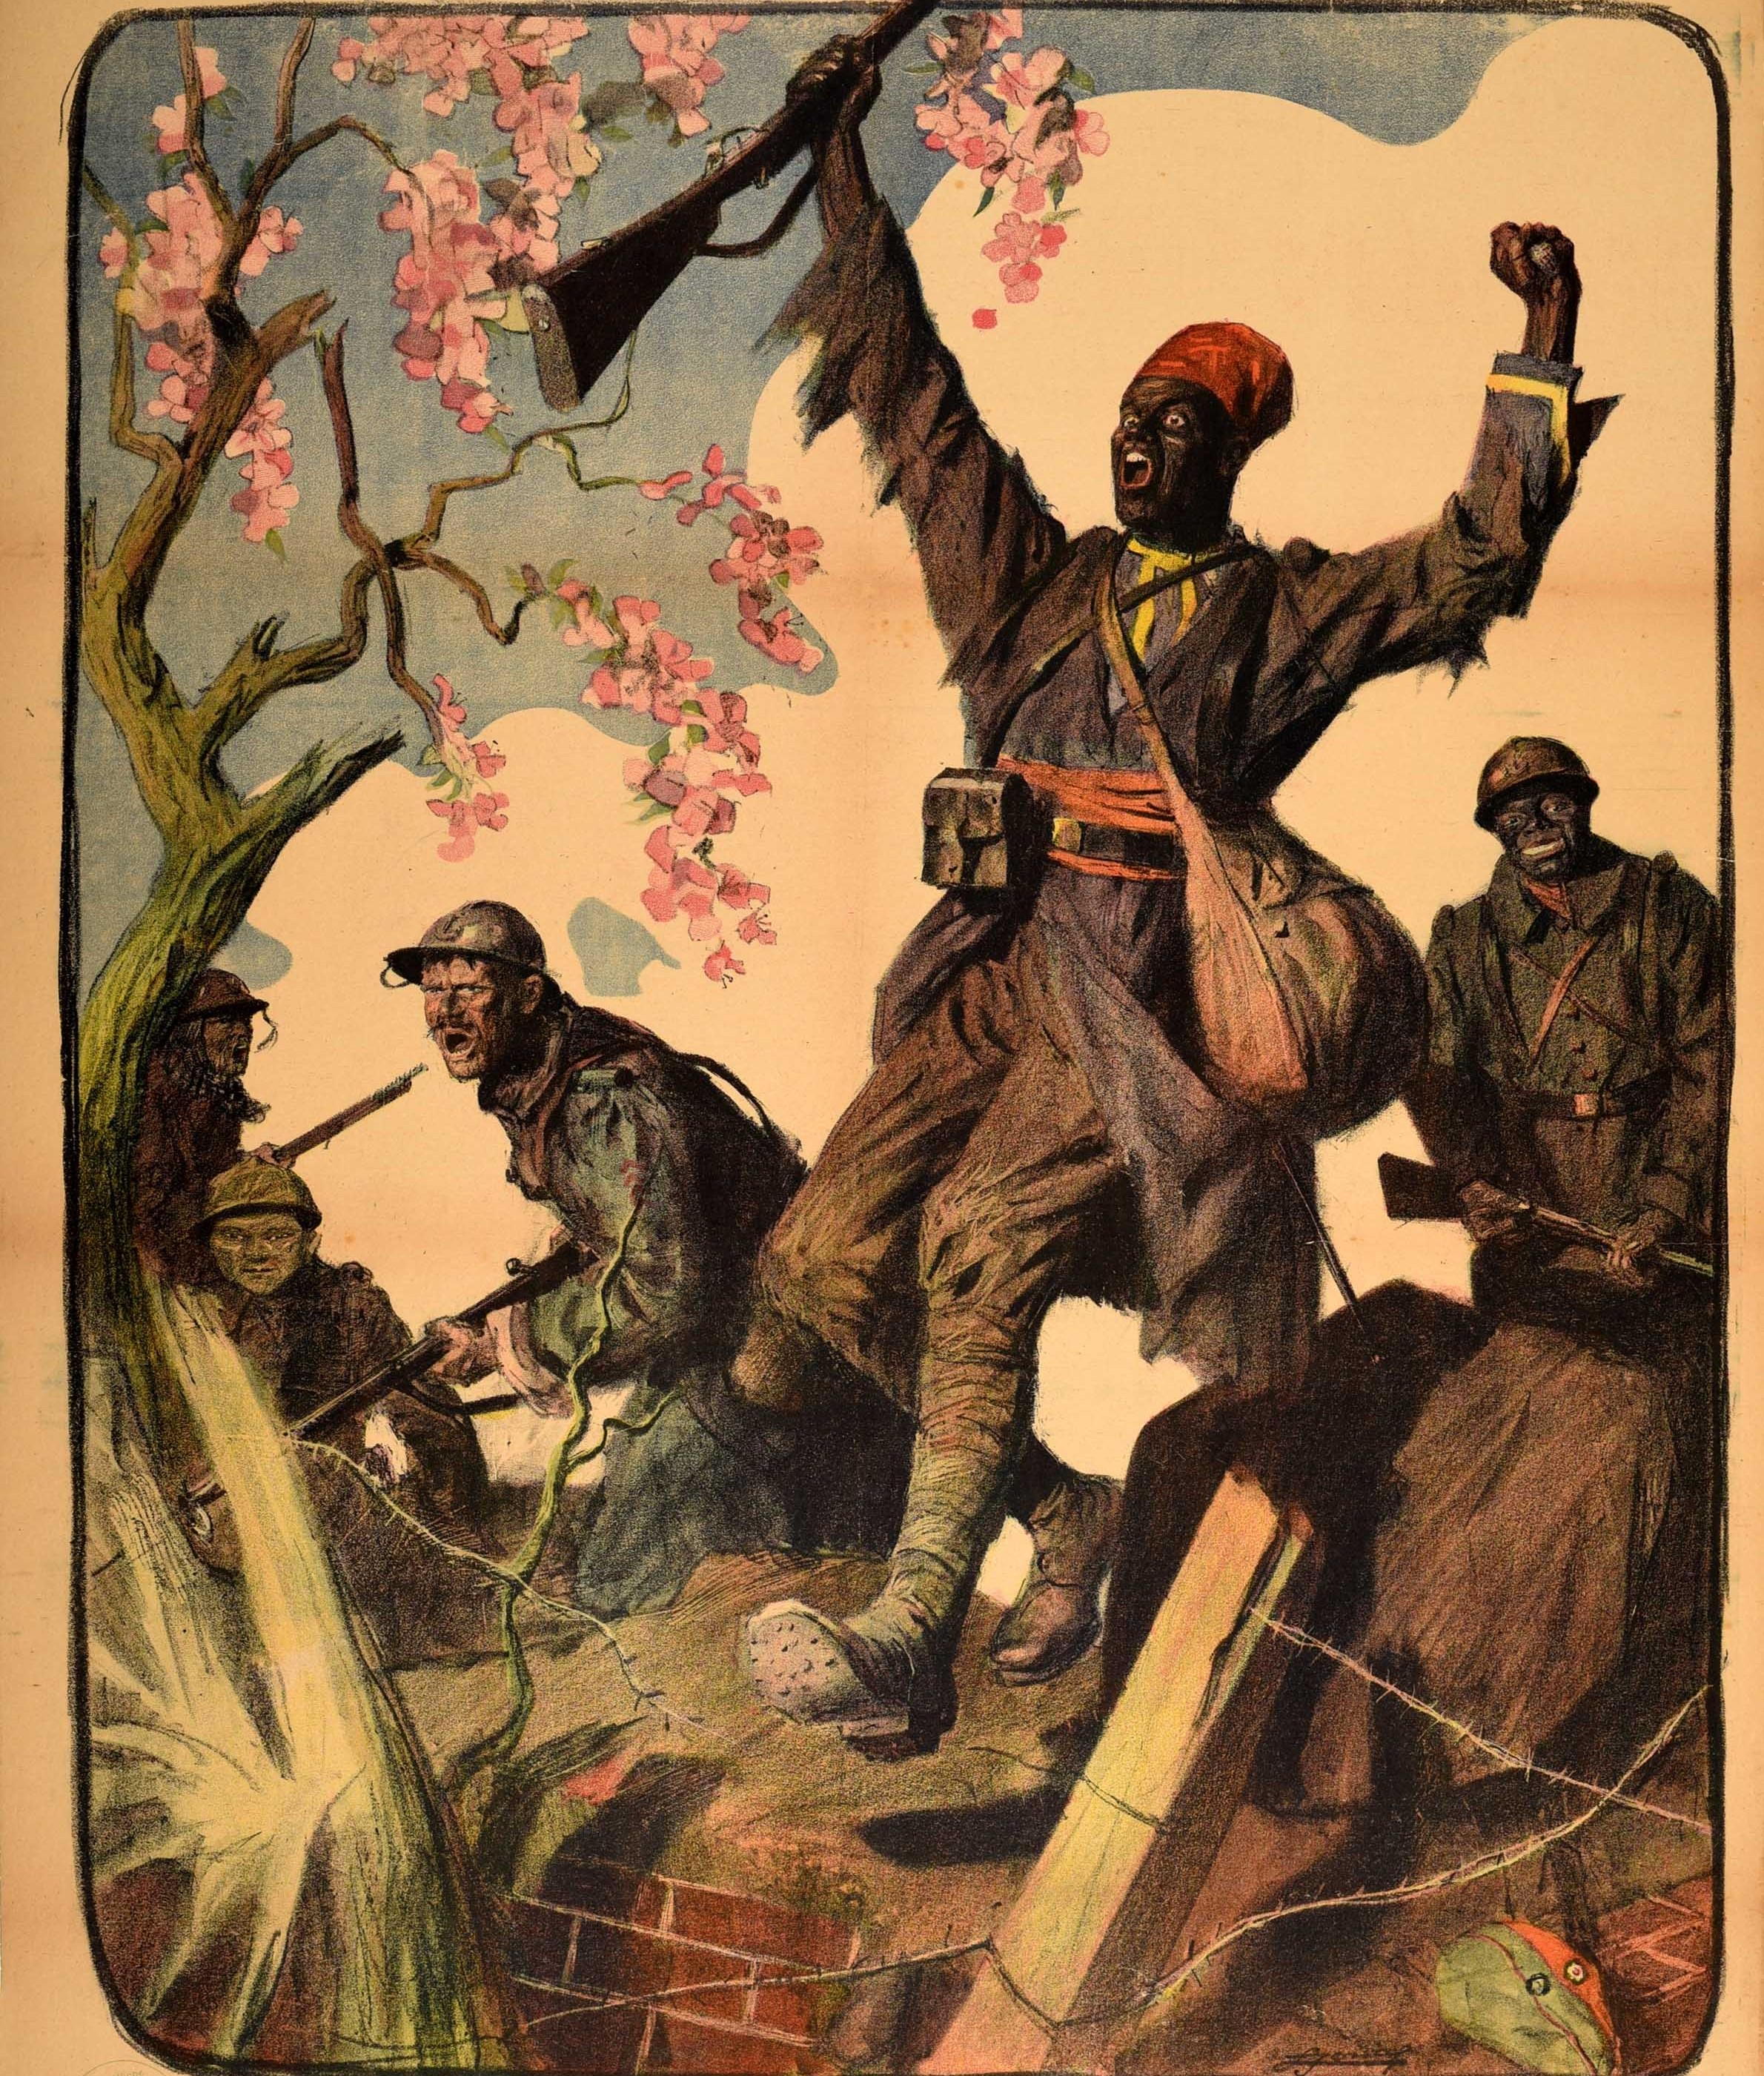 Original antique World War One propaganda poster for the Journee de l'Armee D'Afrique et des Troupes Coloniales / Day for the the African Army and Colonial Troops featuring military soldiers armed with rifle guns charging into battle over a wall and